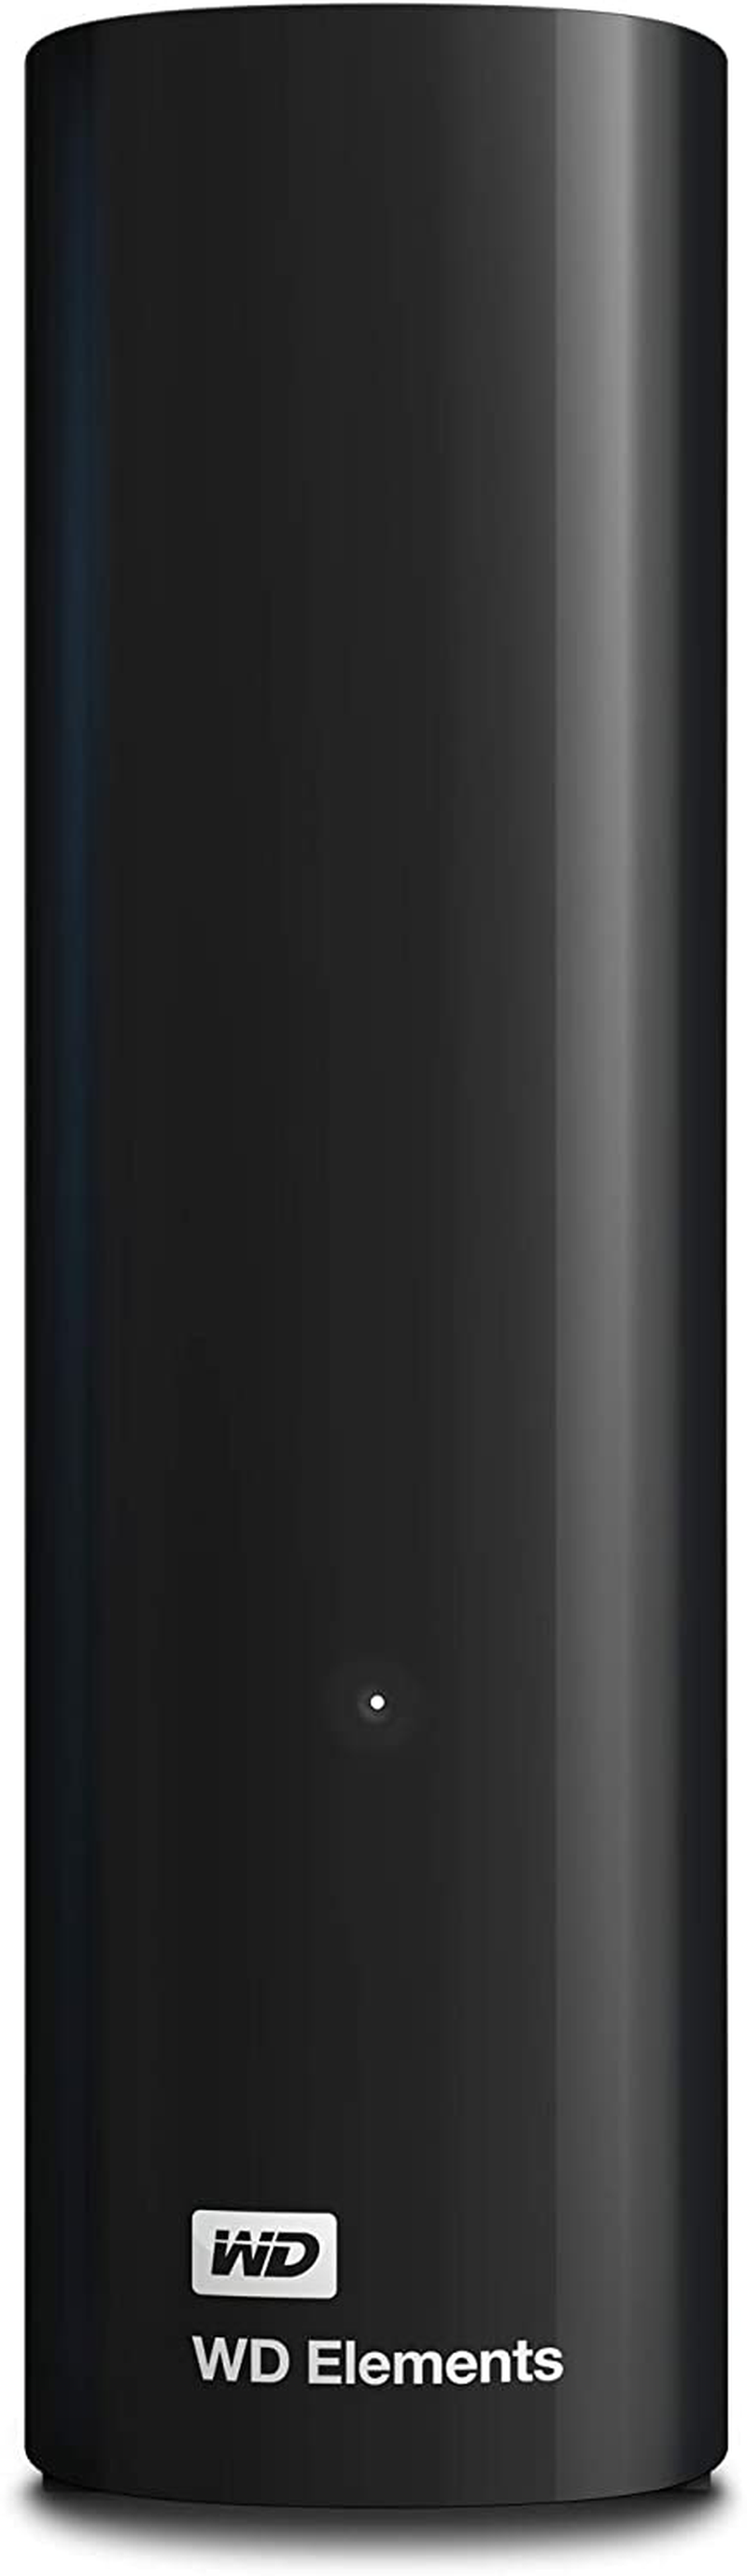 WD 6TB Elements Desktop Hard Drive HDD, USB 3.0, Compatible with PC, Mac, PS4 & Xbox - WDBWLG0060HBK-NESN Electronics > Electronics Accessories > Computer Components > Storage Devices > Hard Drives Western Digital 3TB  